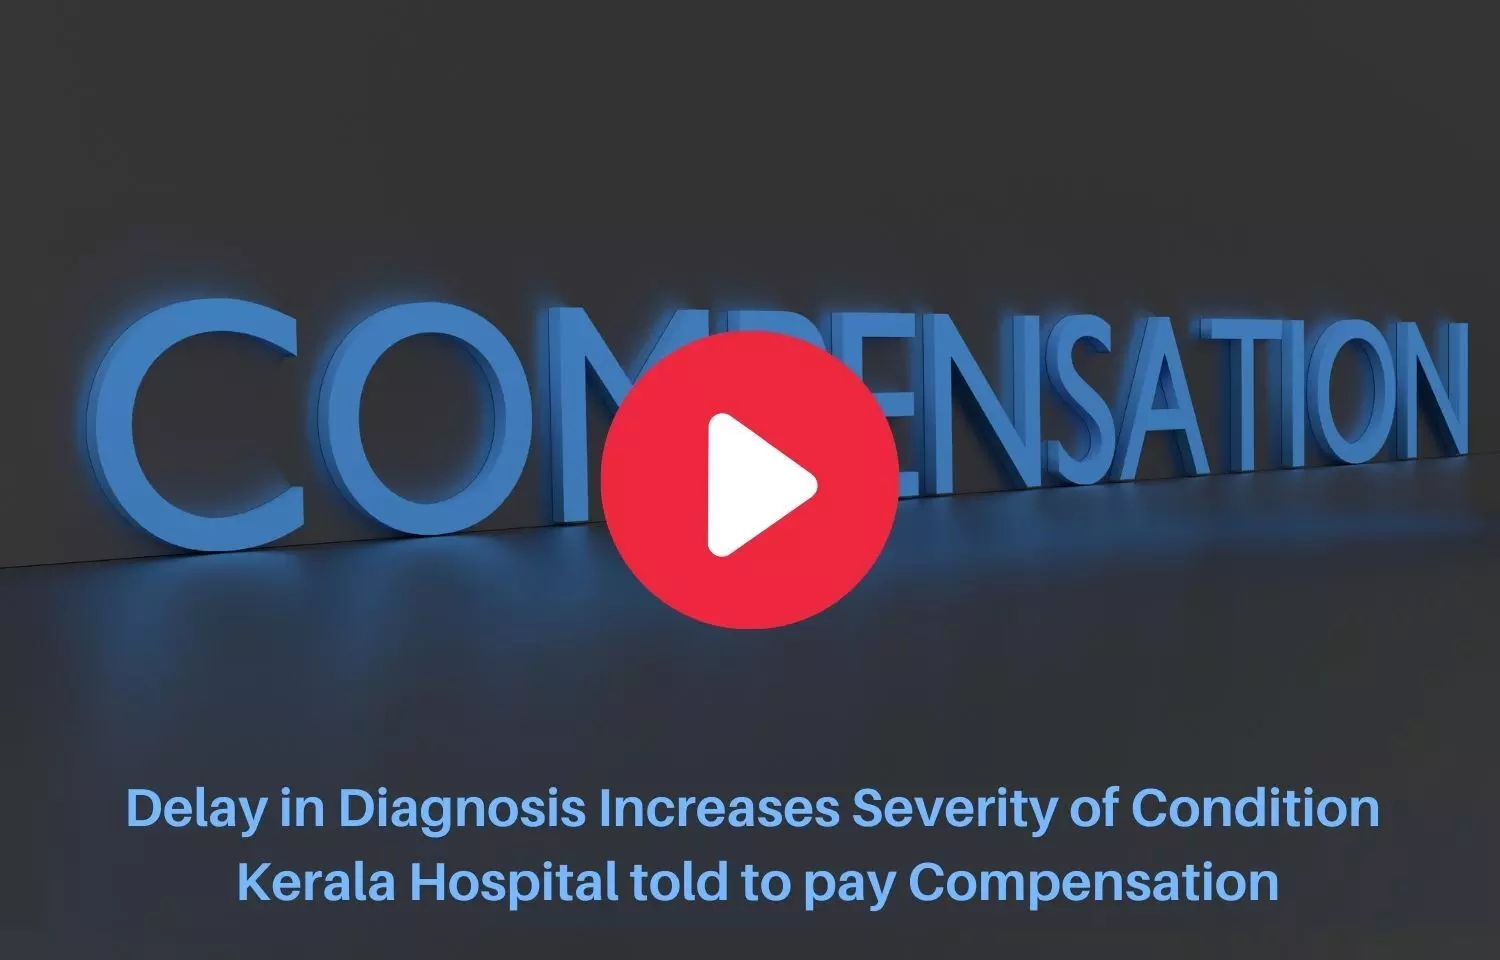 Delay in Diagnosis Increases Severity of Condition: Kerala Hospital told to pay Compensation